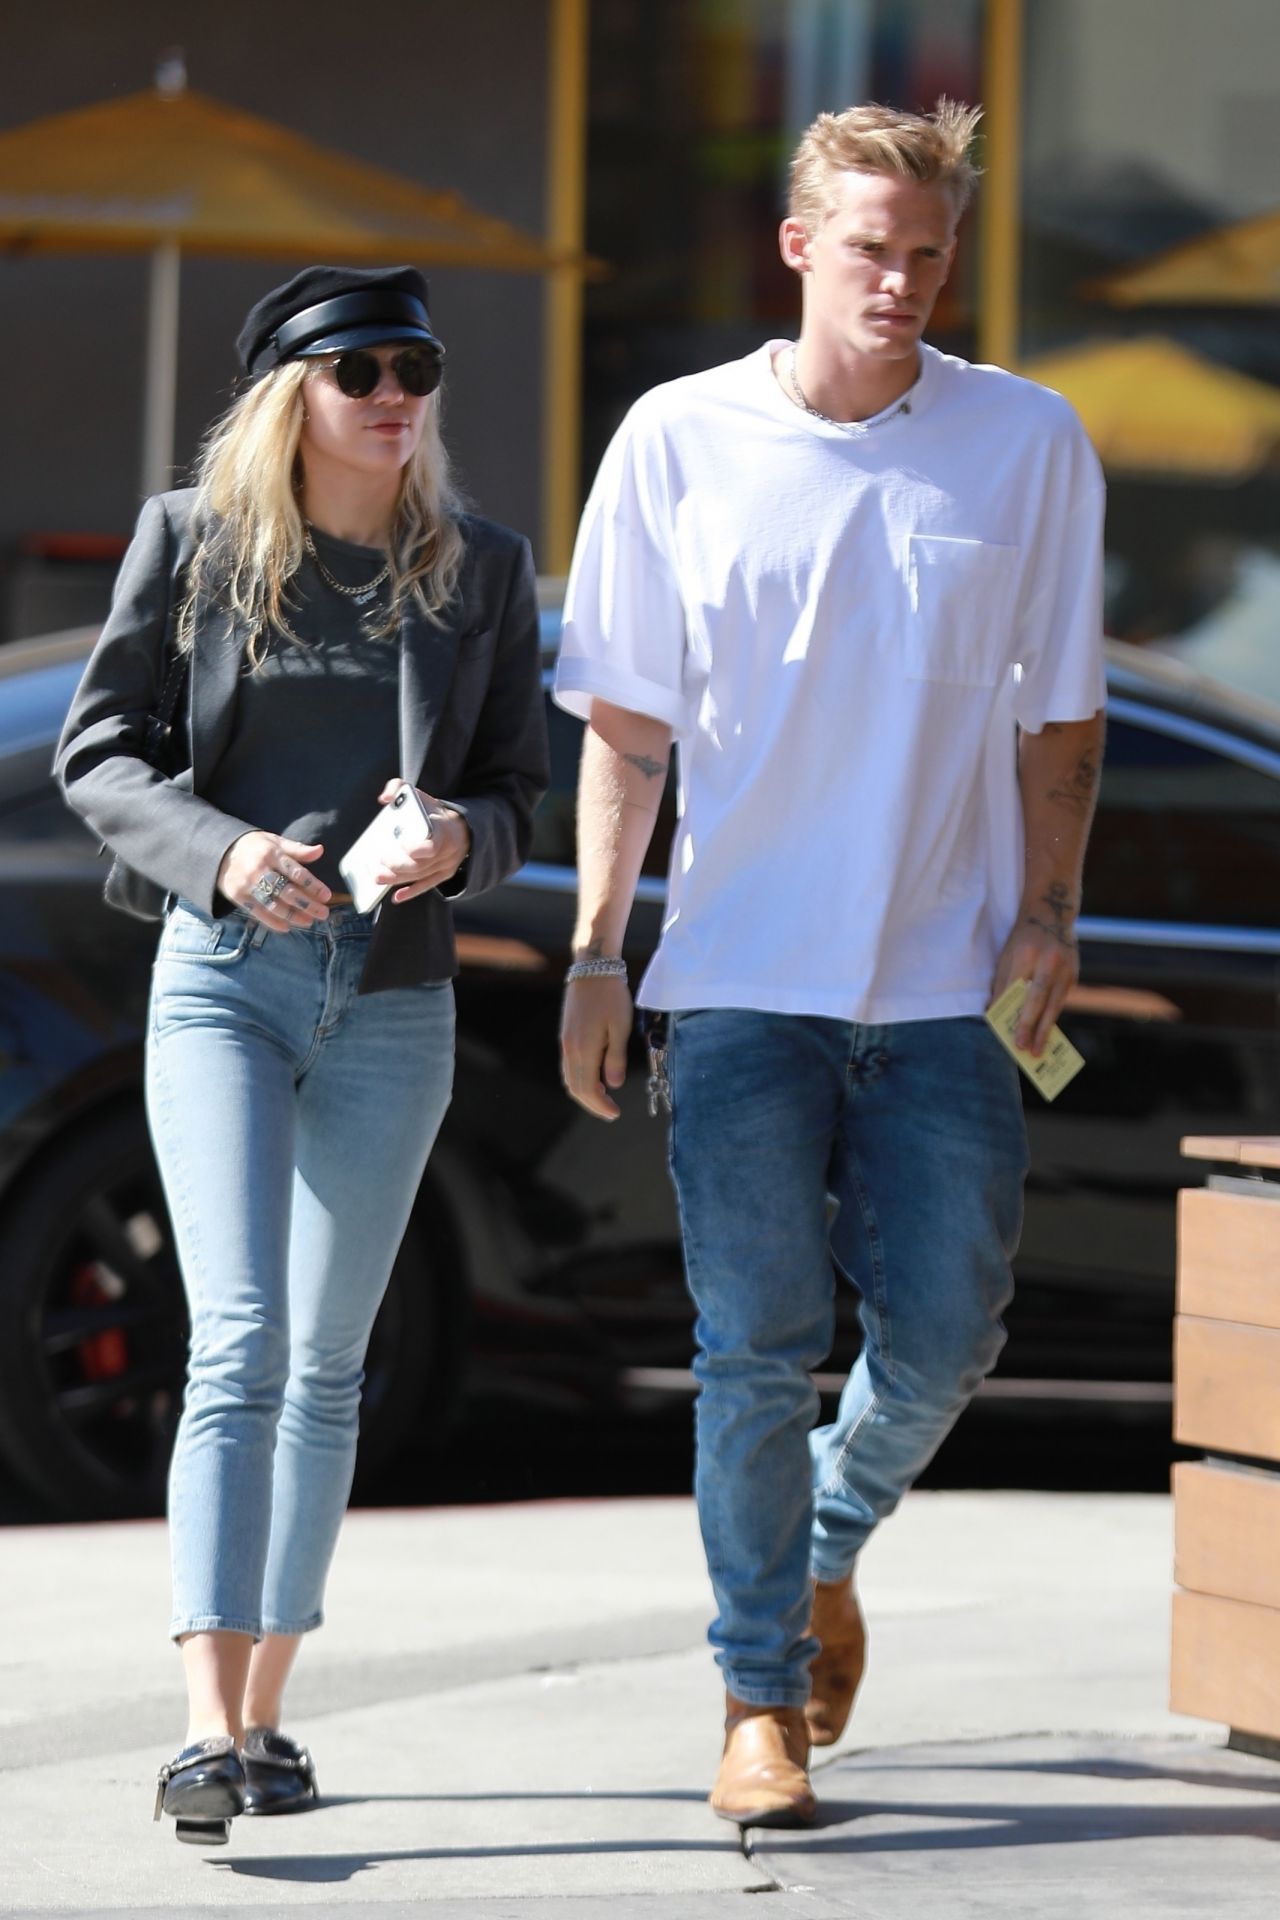 https://celebmafia.com/wp-content/uploads/2019/10/miley-cyrus-out-for-lunch-in-los-angeles-10-28-2019-5.jpg